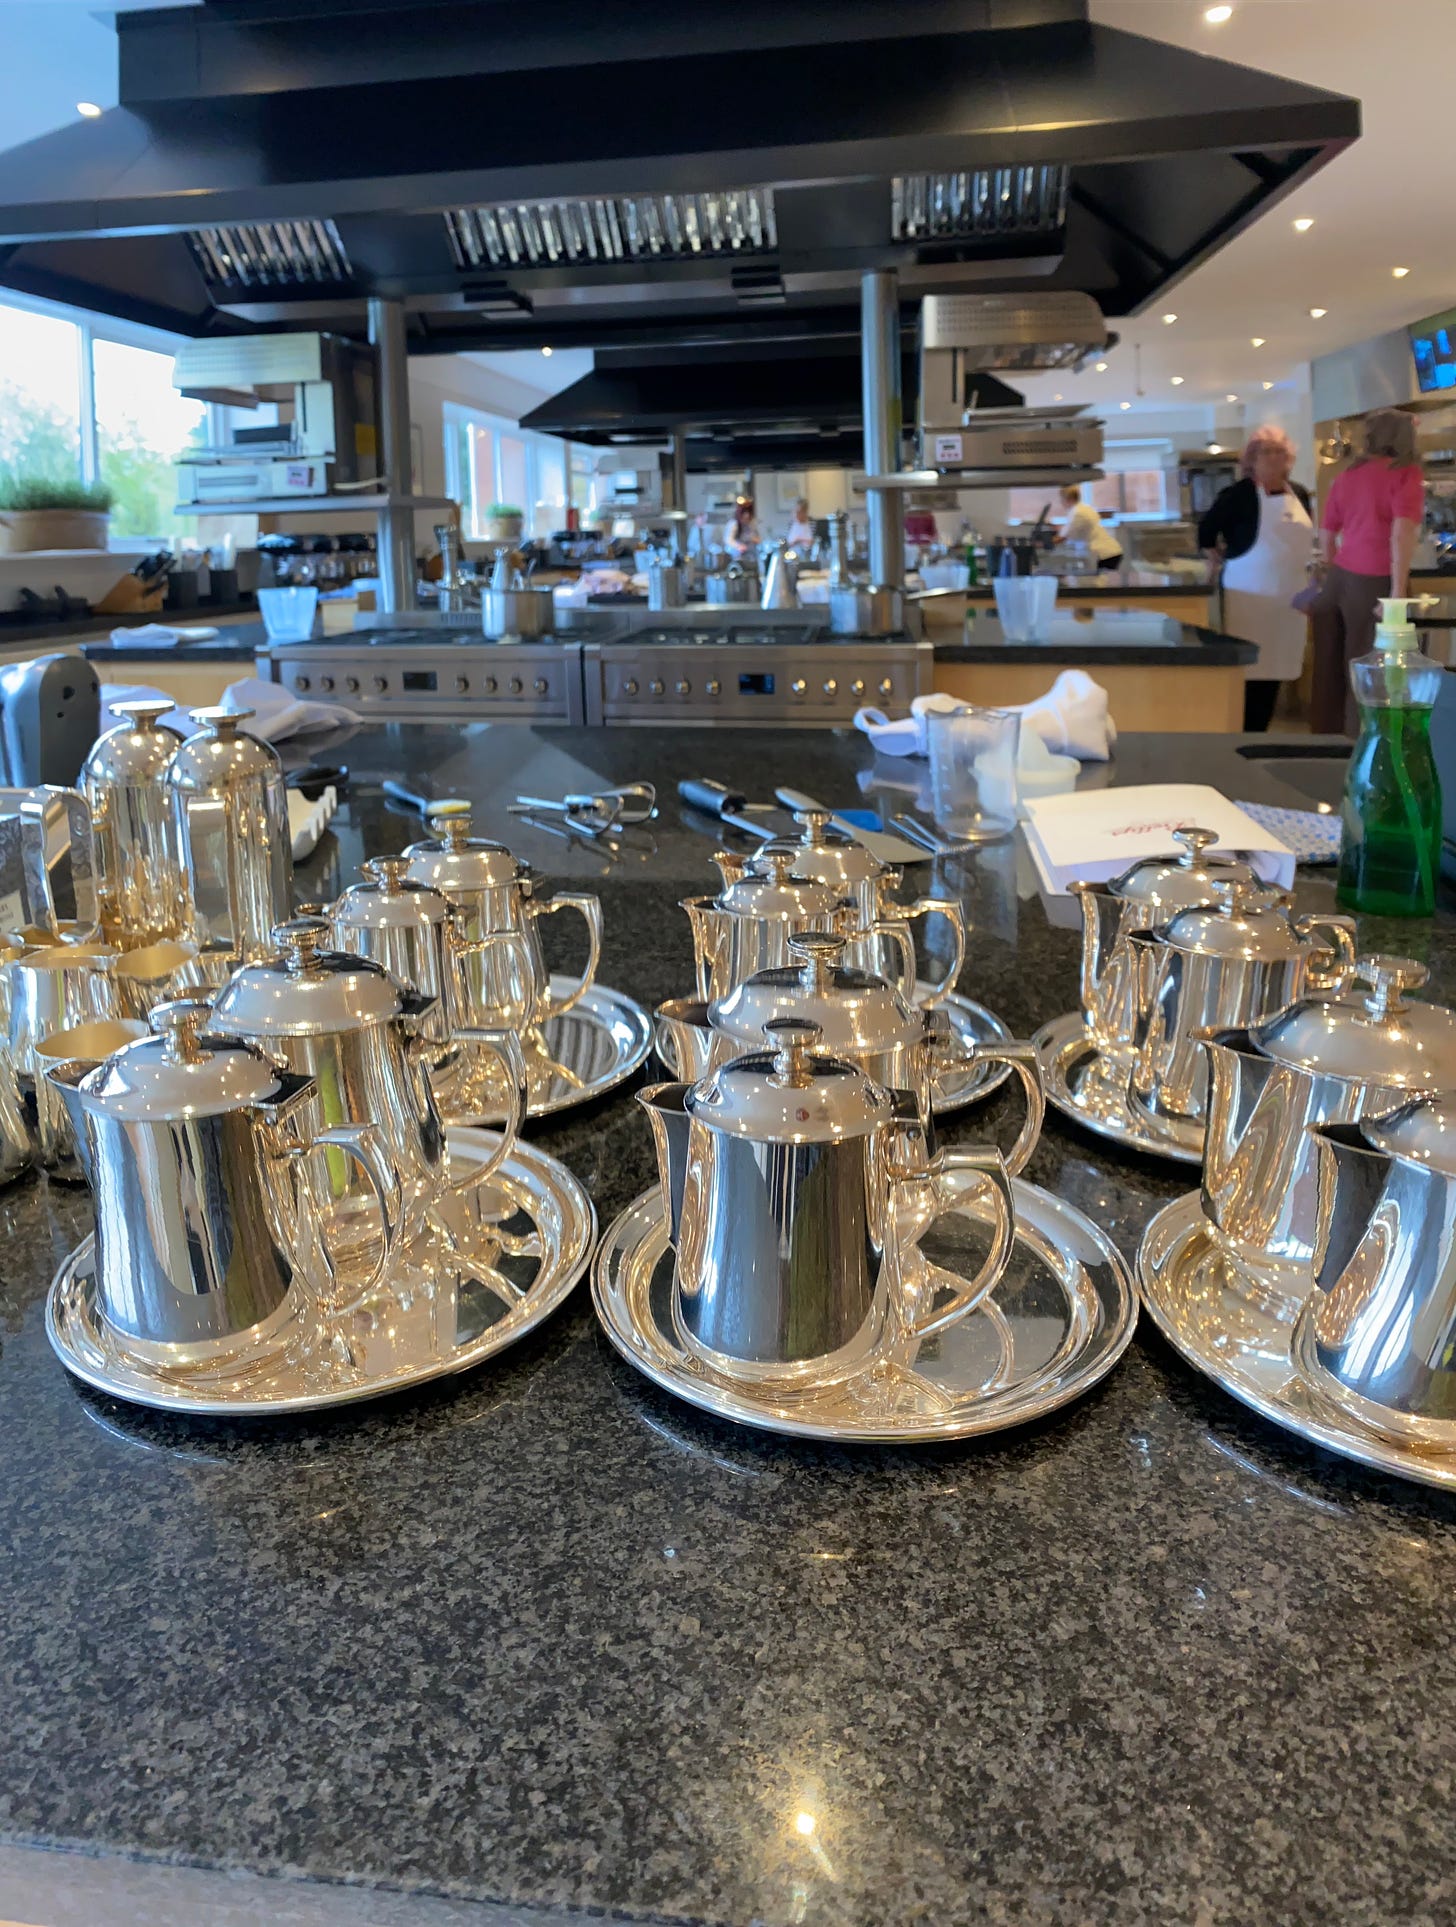 Bettys Cookery School kitchen, with rows of silver tea pots in the foreground.